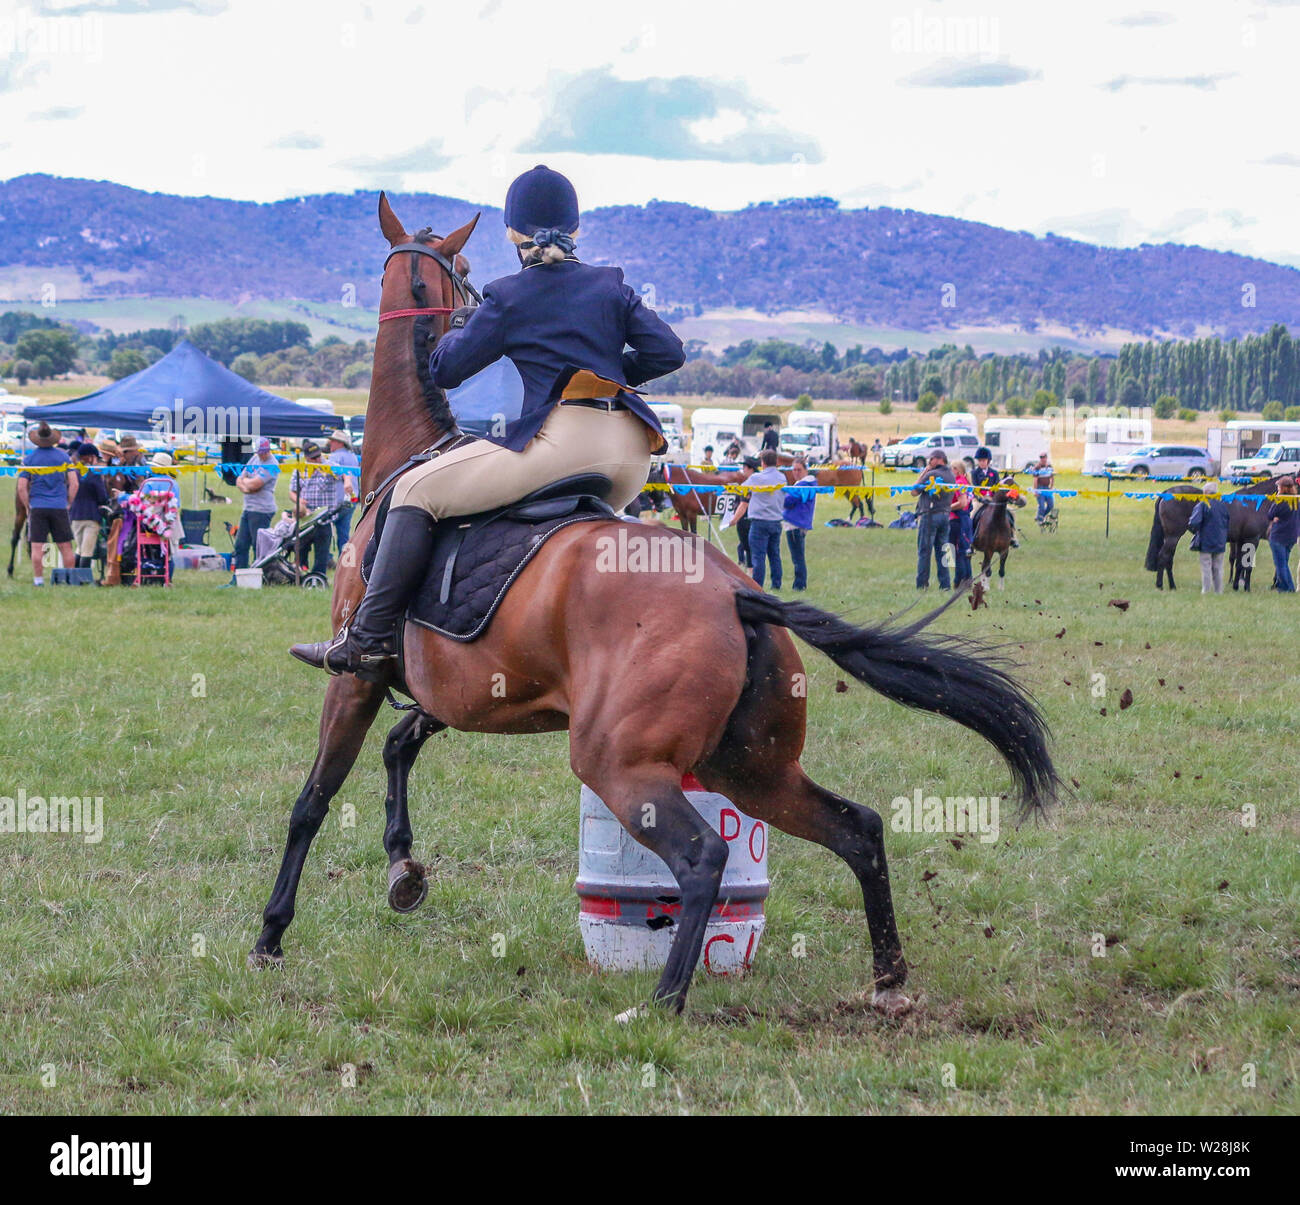 Barrel racing at Bungendore Show in New south Wales, Australia Stock Photo